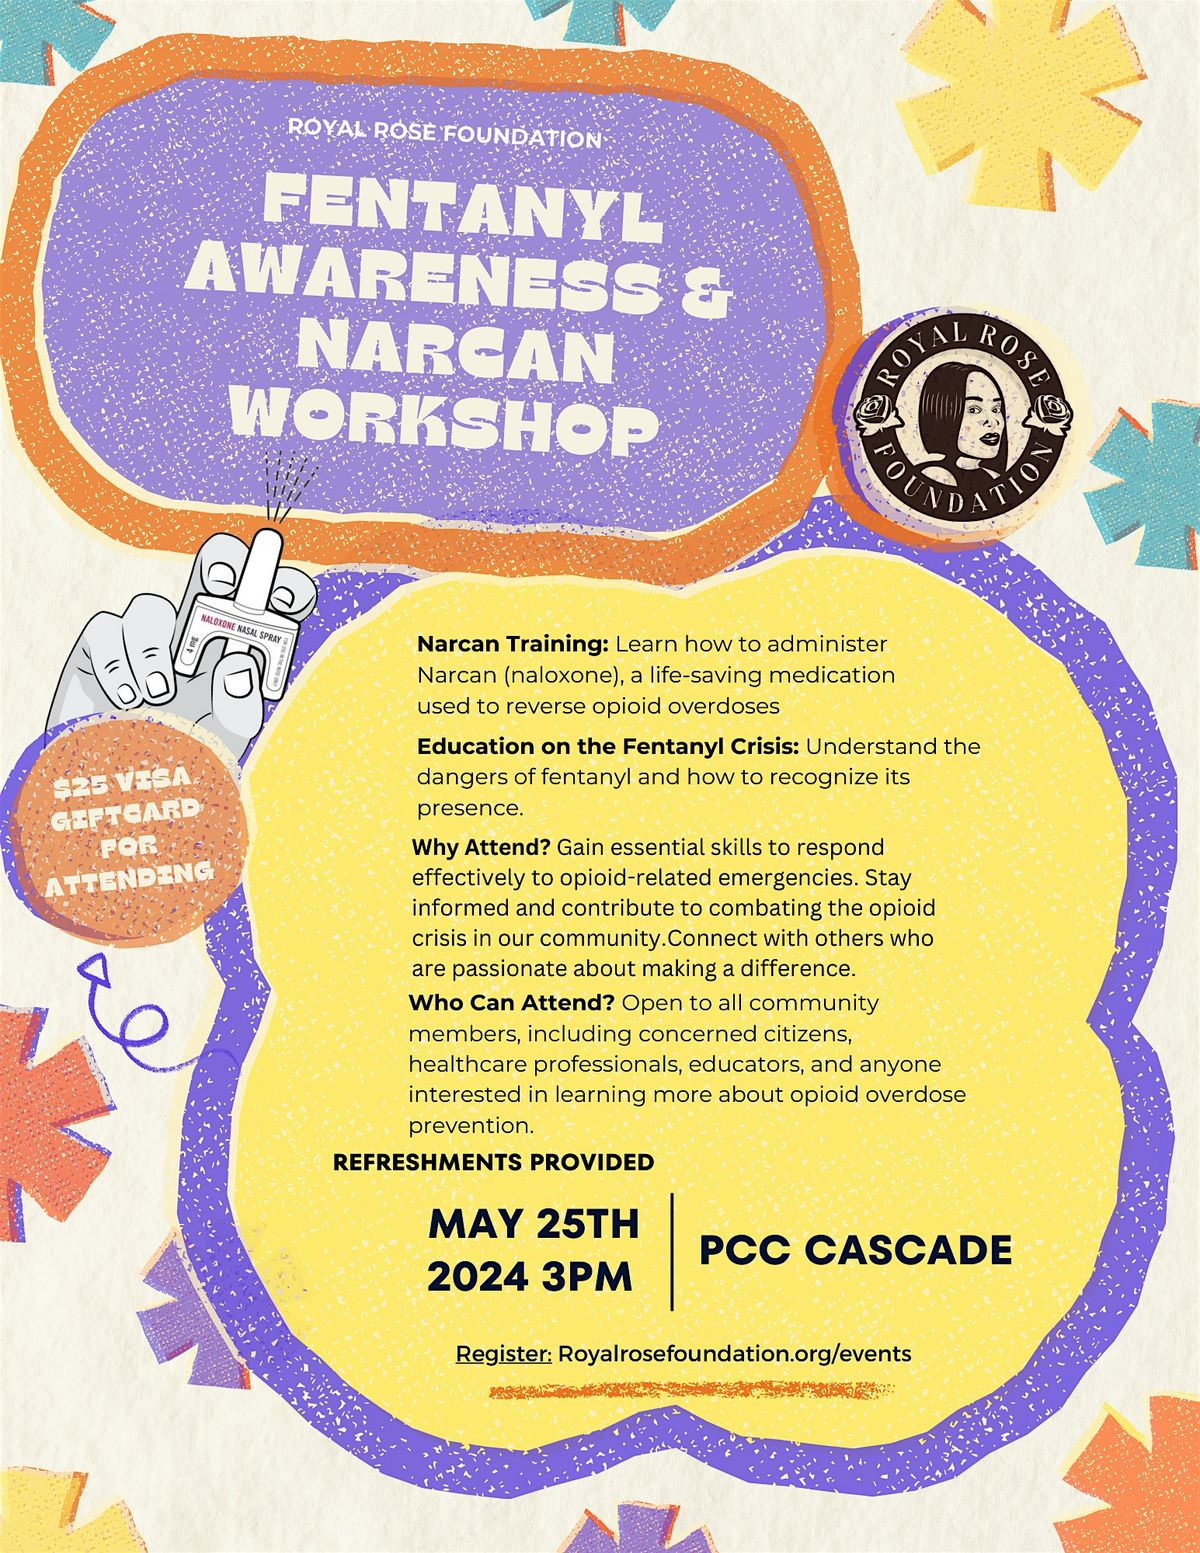 Fentanyl awareness and Narcan workshop